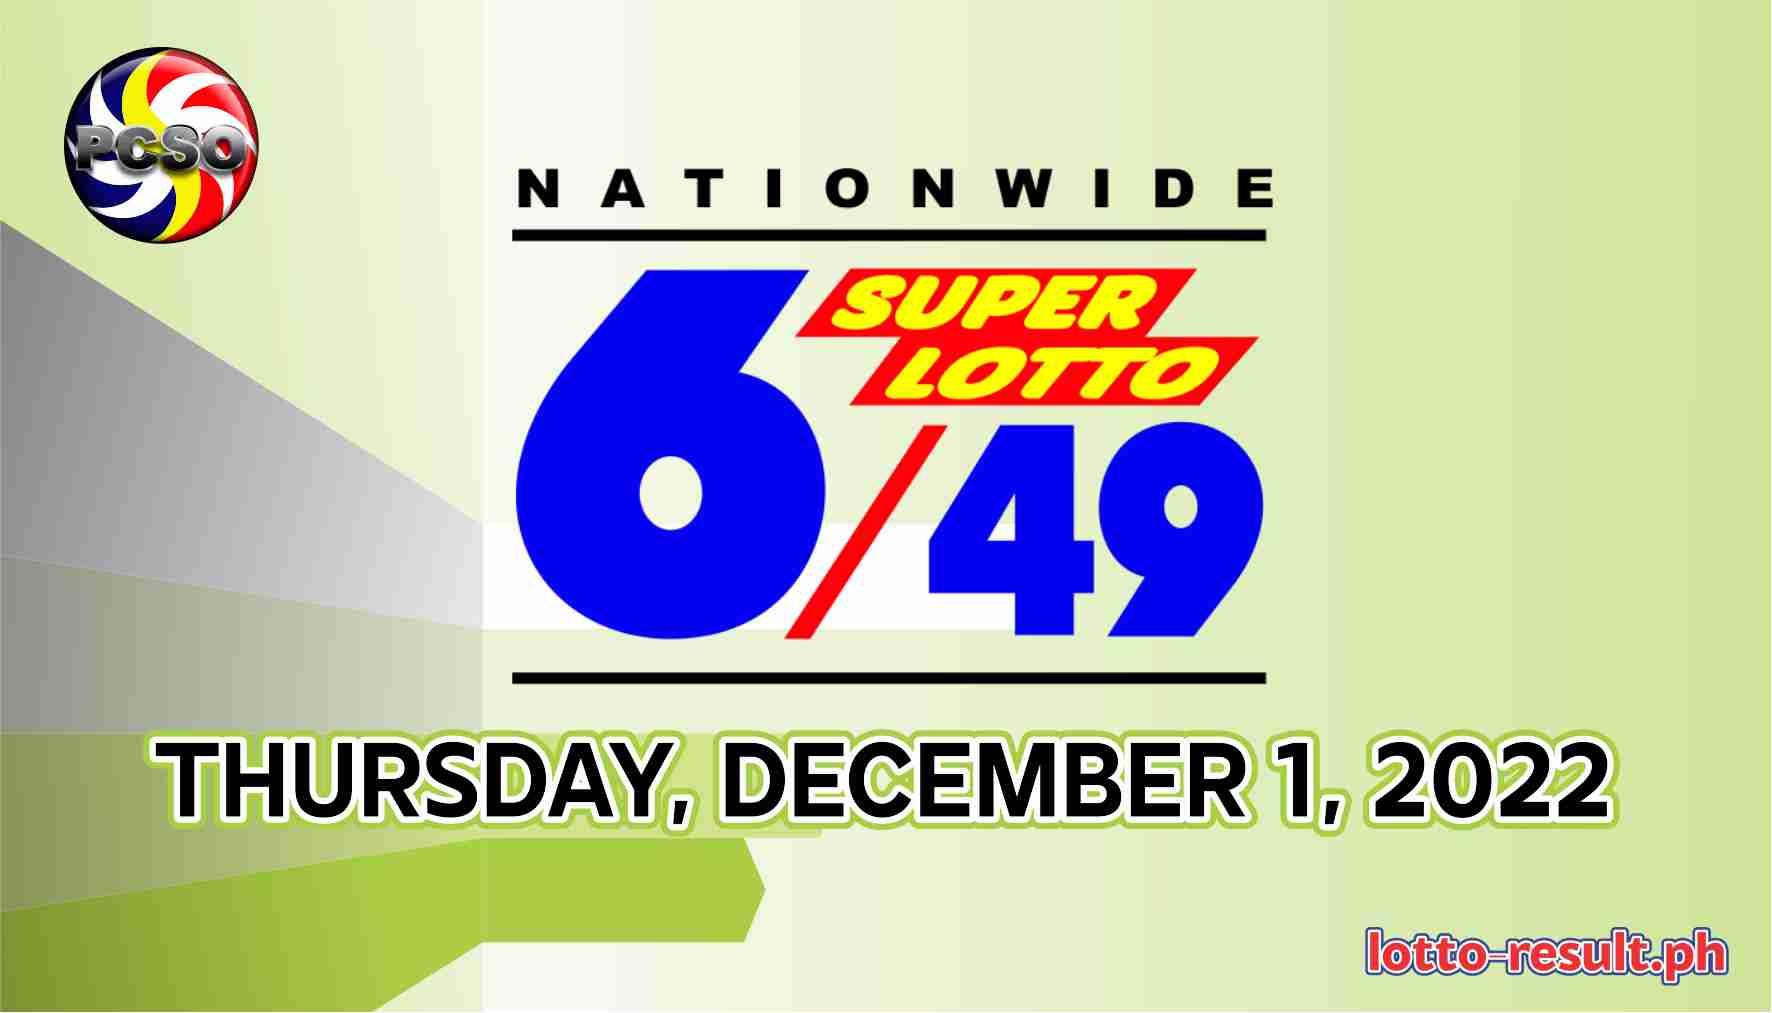 6/49 Lotto Result Today, Thursday, December 1, 2022 Official PCSO